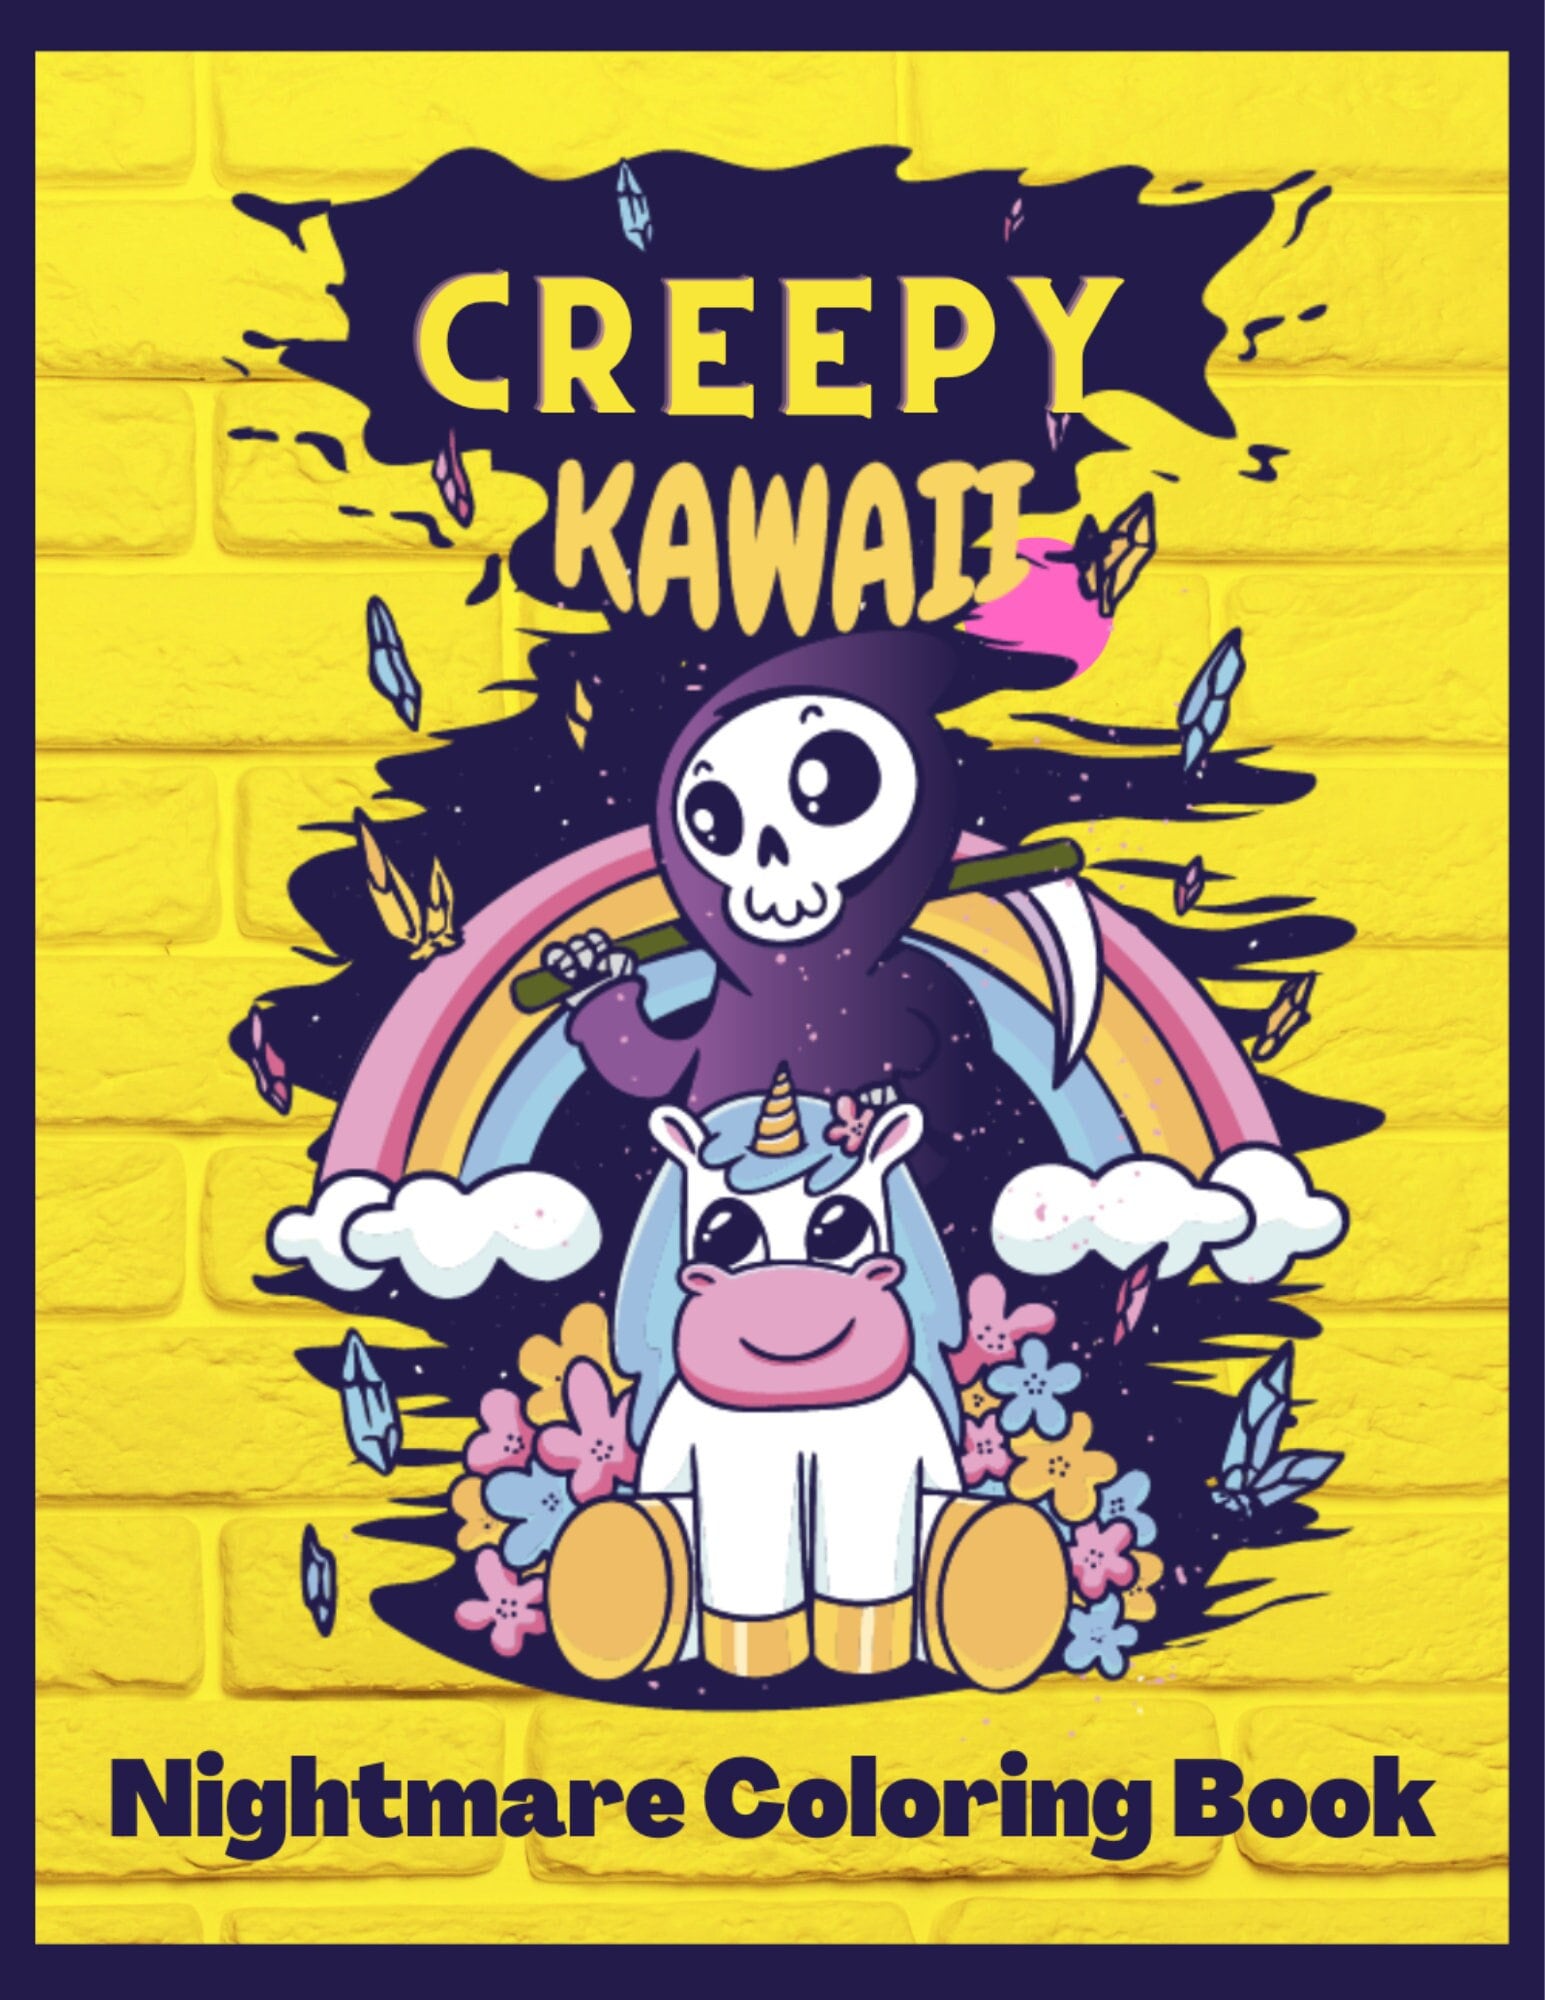 Only left in stock creepy kawaii nightmare coloring book for adults and kids features coloring pages printable pdf coloring pages